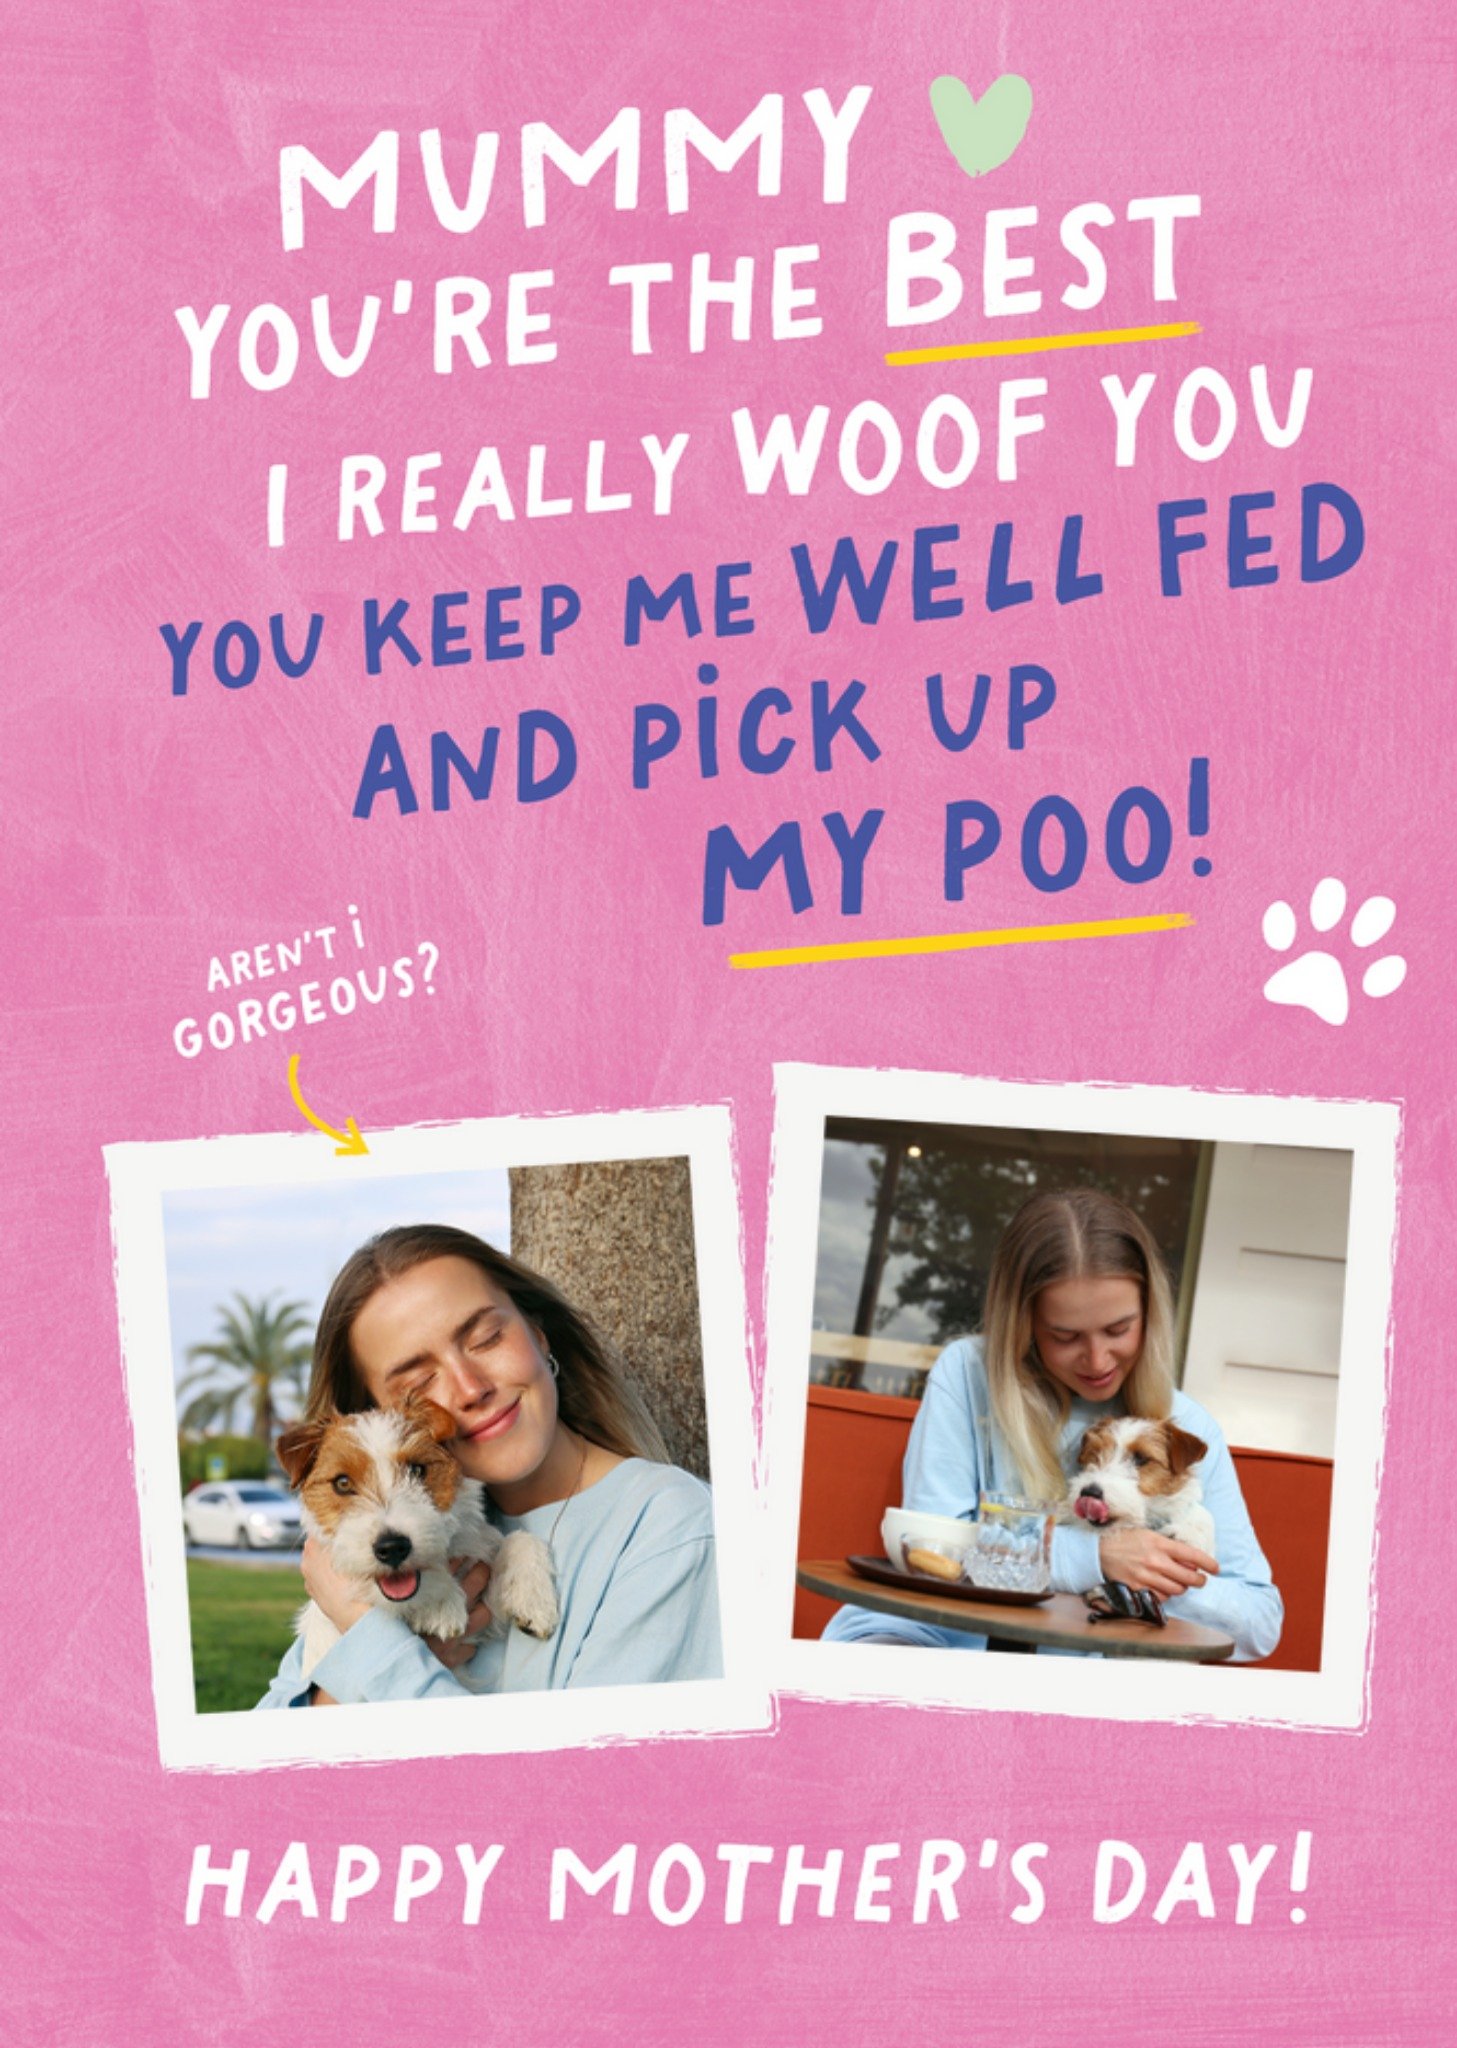 Moonpig Really Woof You Mummy From The Dog Photo Upload Mother's Day Card Ecard